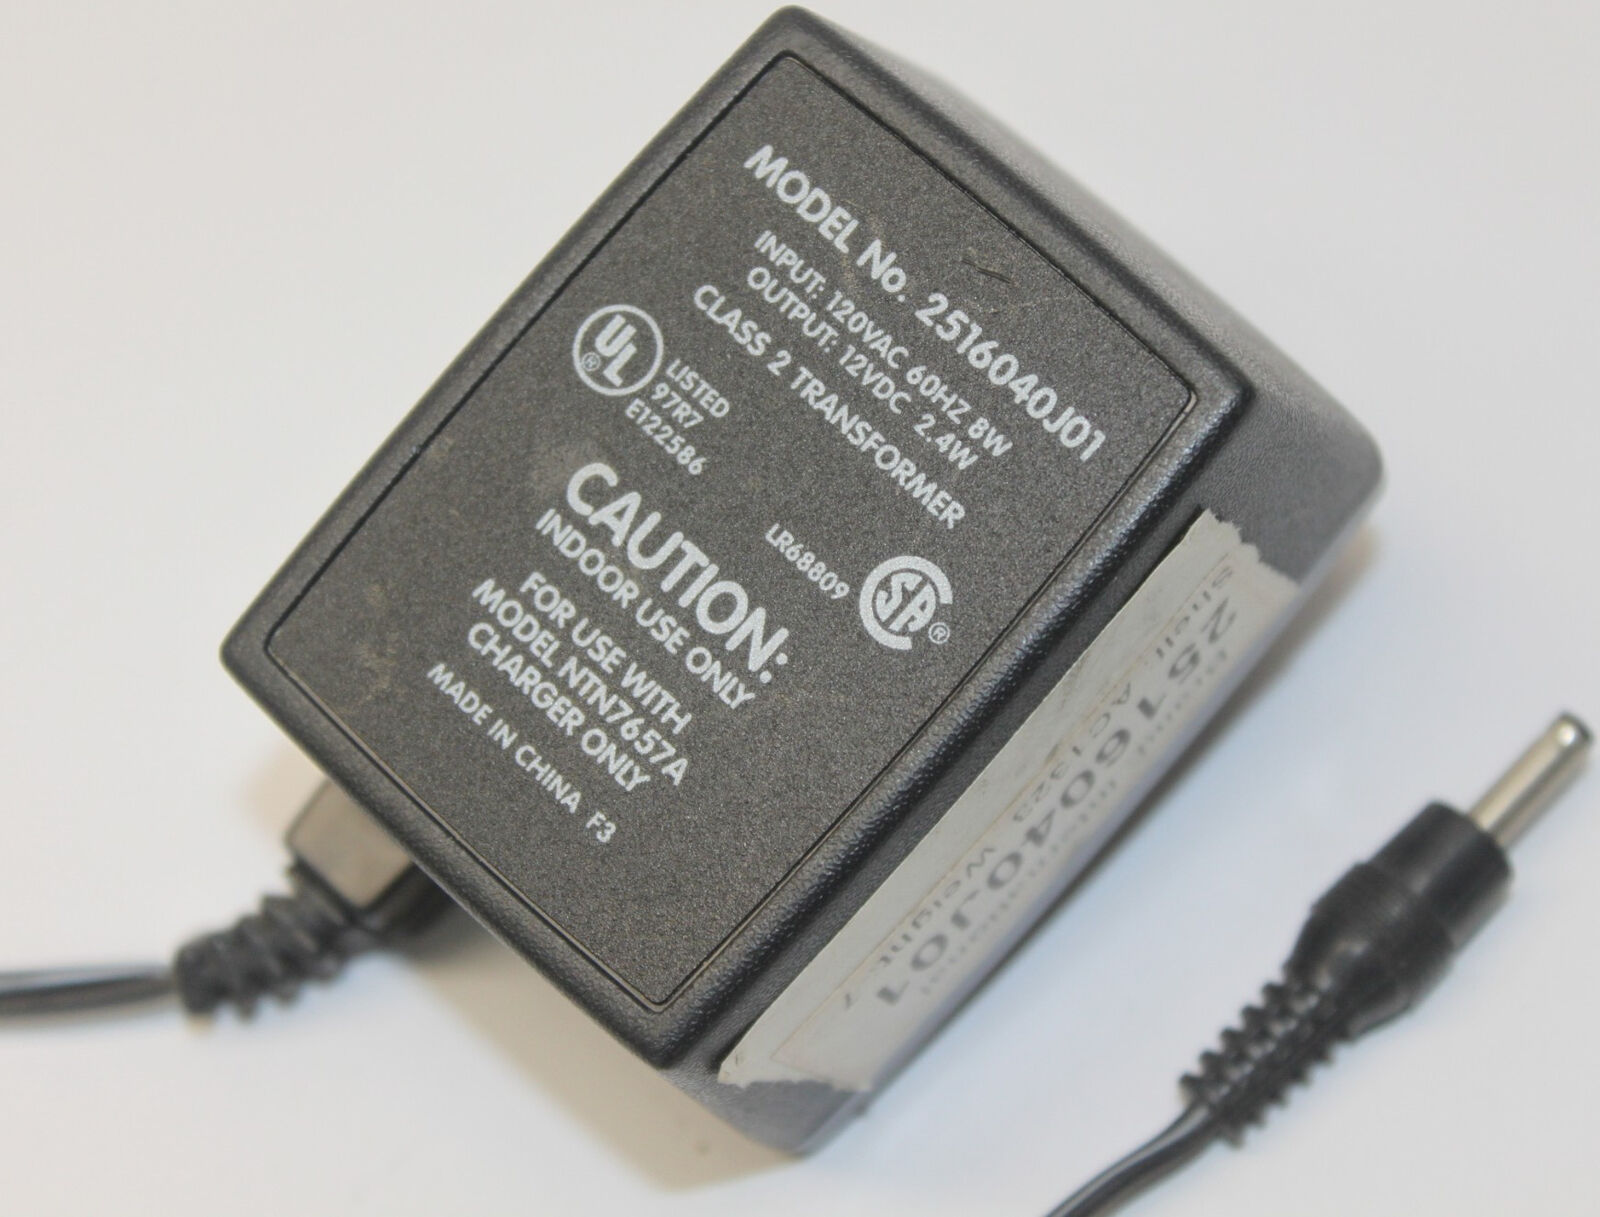 *Brand NEW*AC Adapter 2516040J01 Charger 12 Volts 2.4W Class 2 Transformer Power Supply